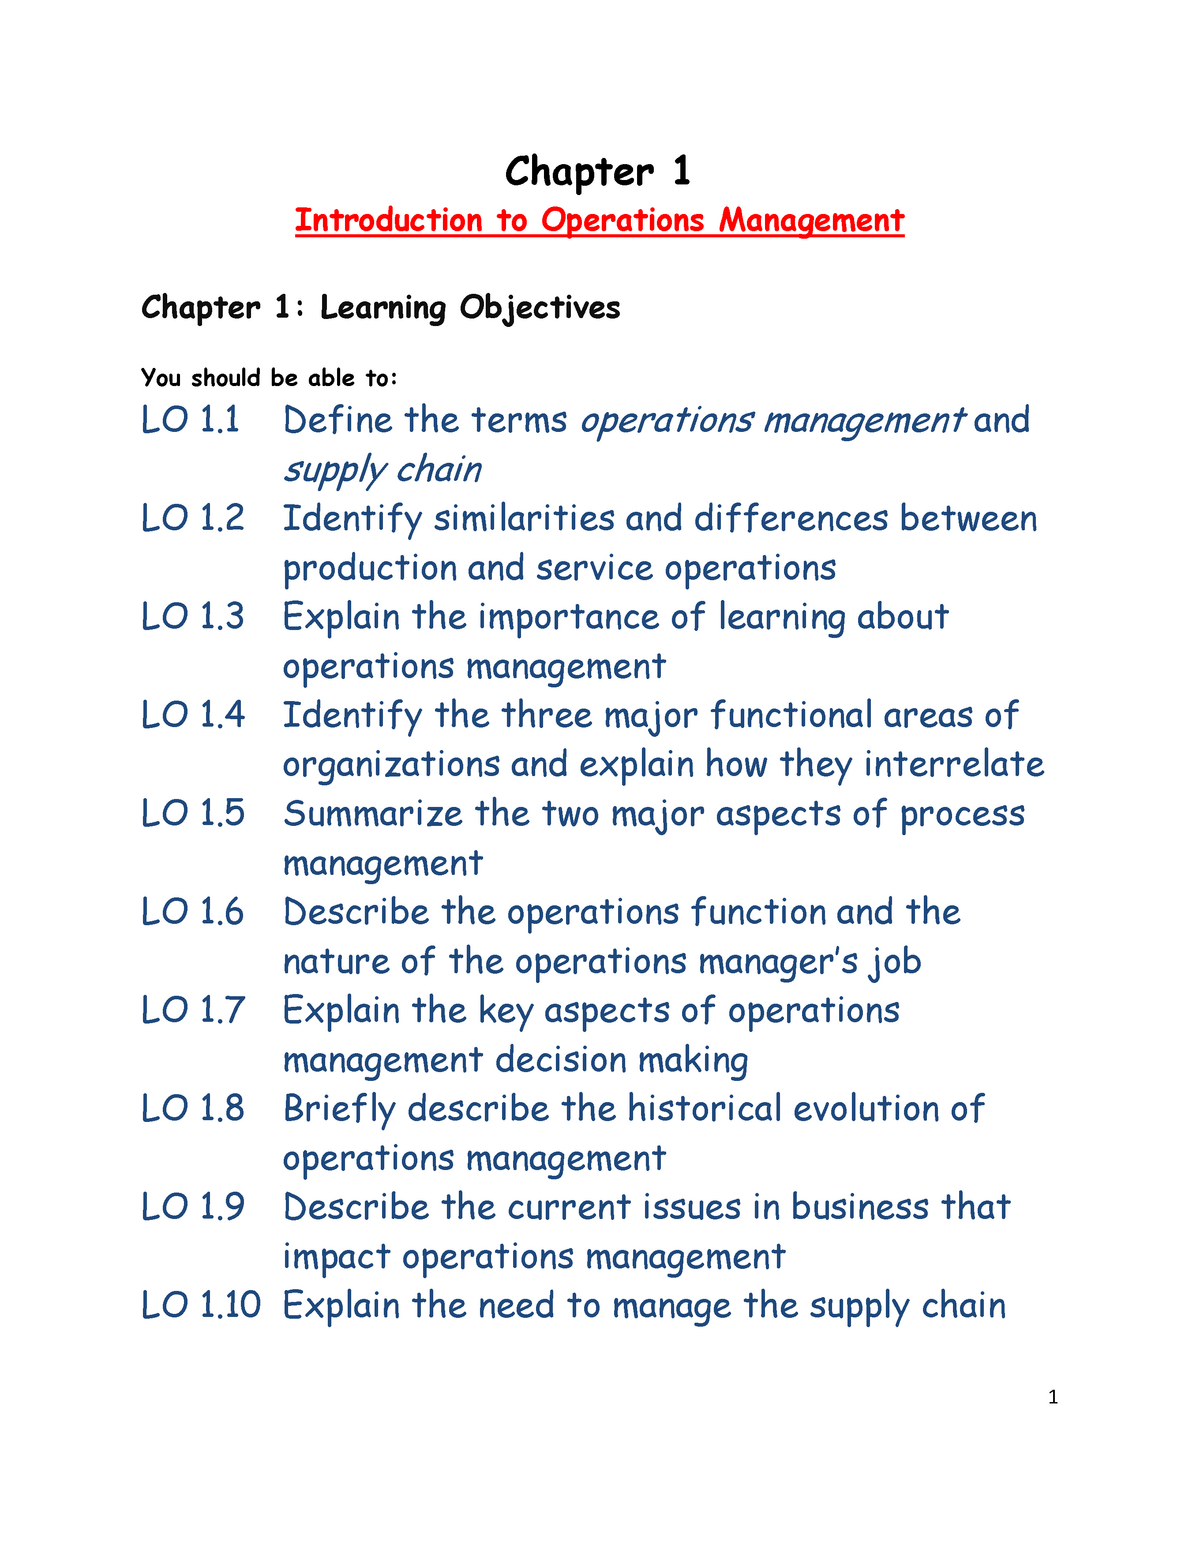 operations research 2 lecture notes